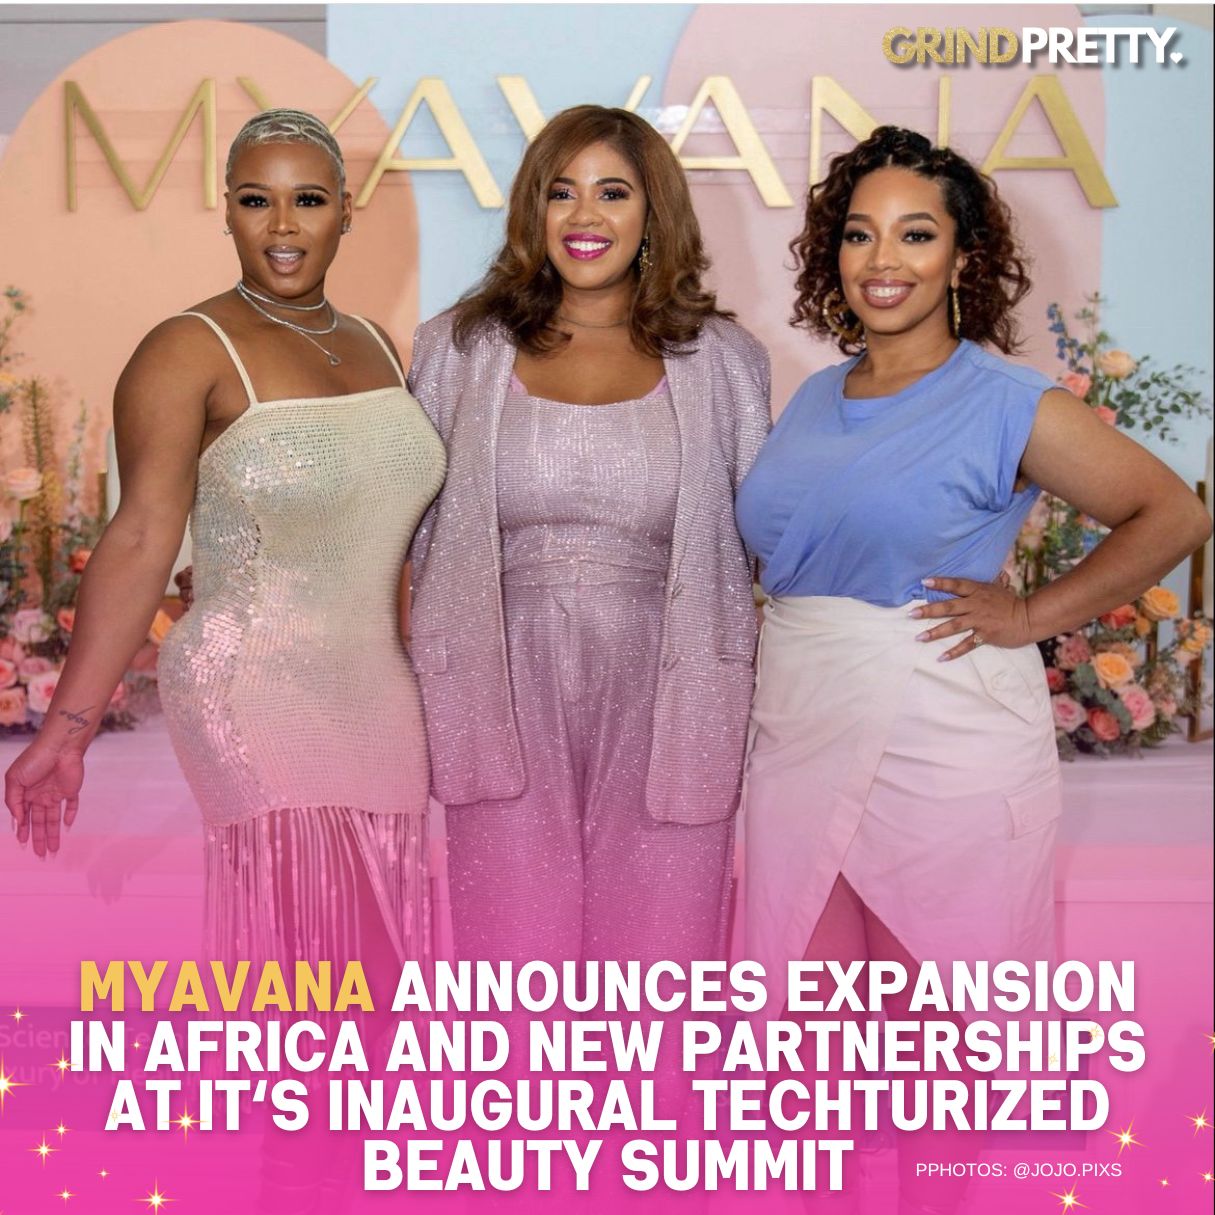 MYAVANA Announces Expansion in Africa and New Partnerships at it‘s Inaugural Techturized Beauty Summit